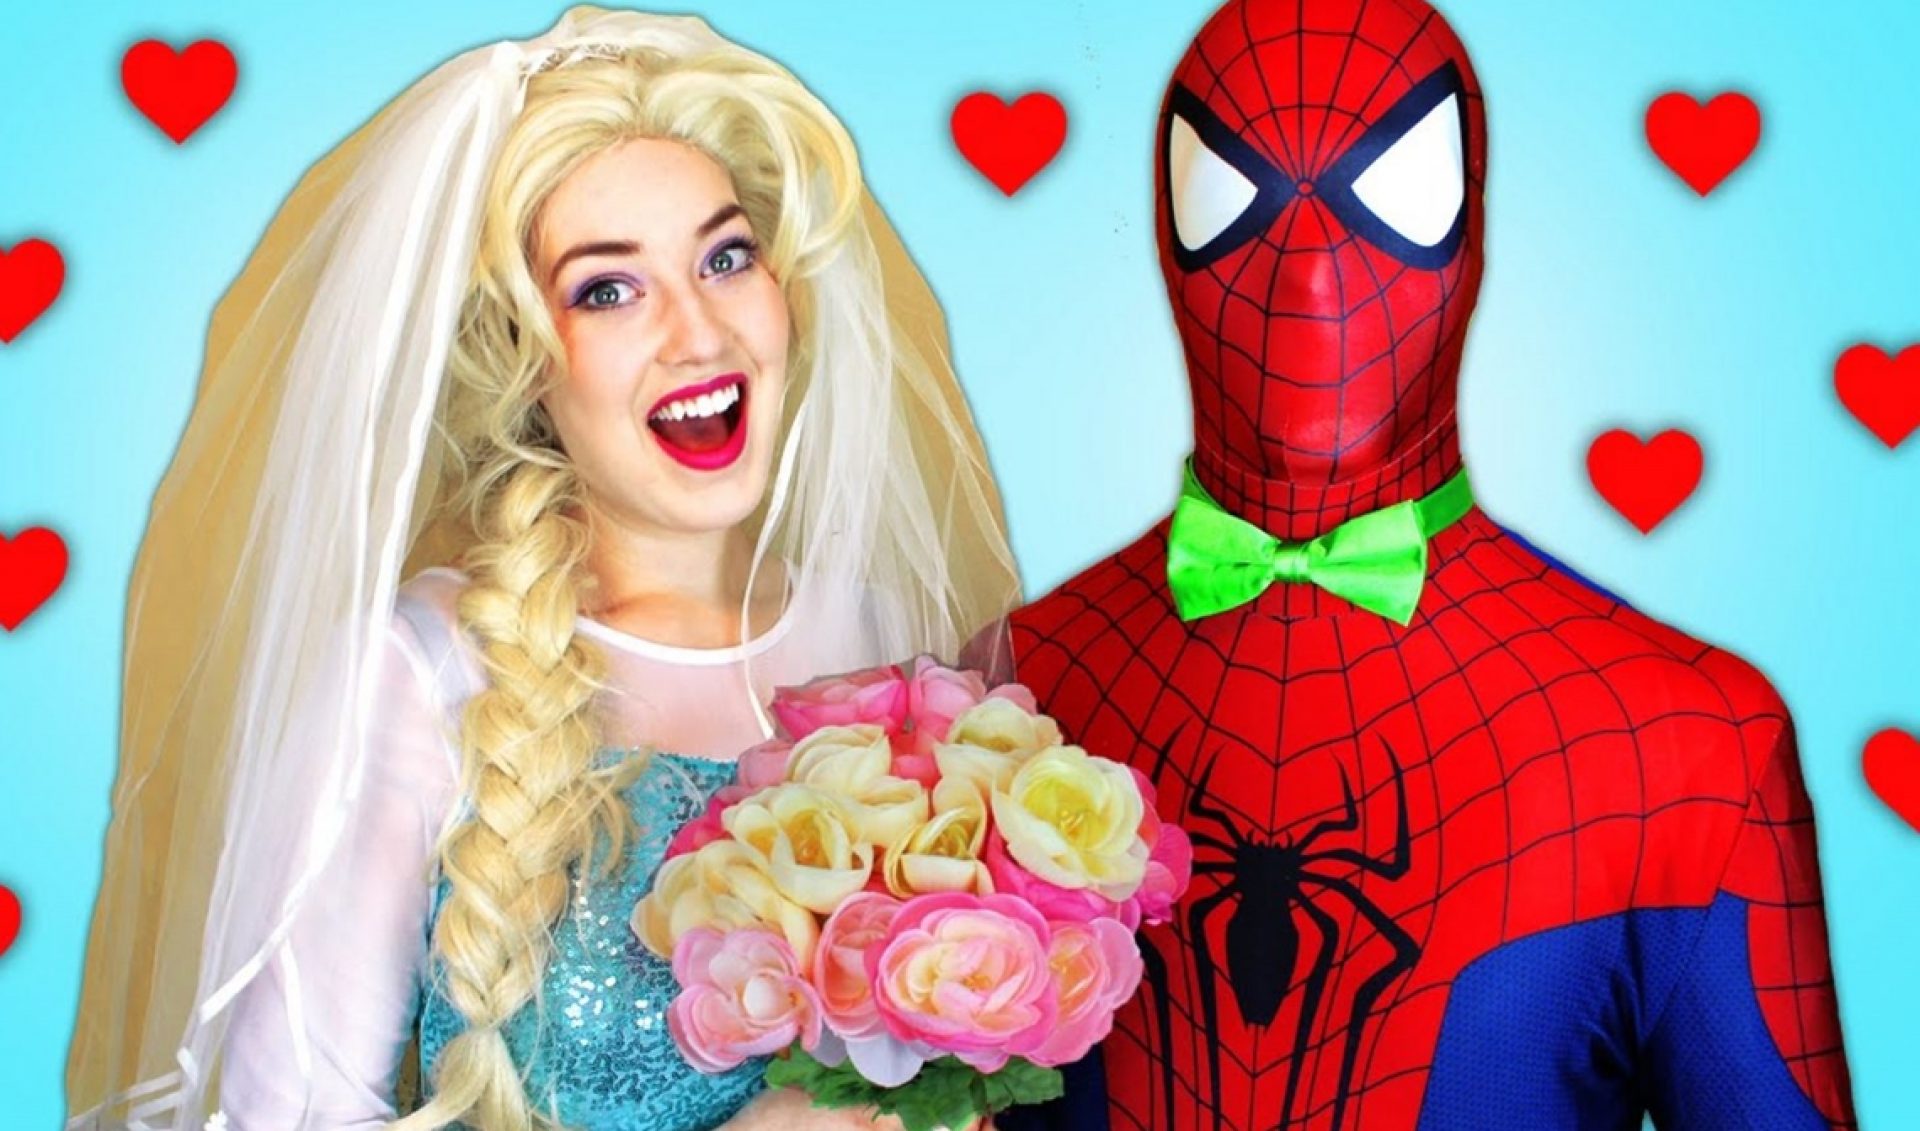 YouTube’s Latest Bizarre Trend Has Adults Dressing Up In Spider-Man And Elsa Costumes